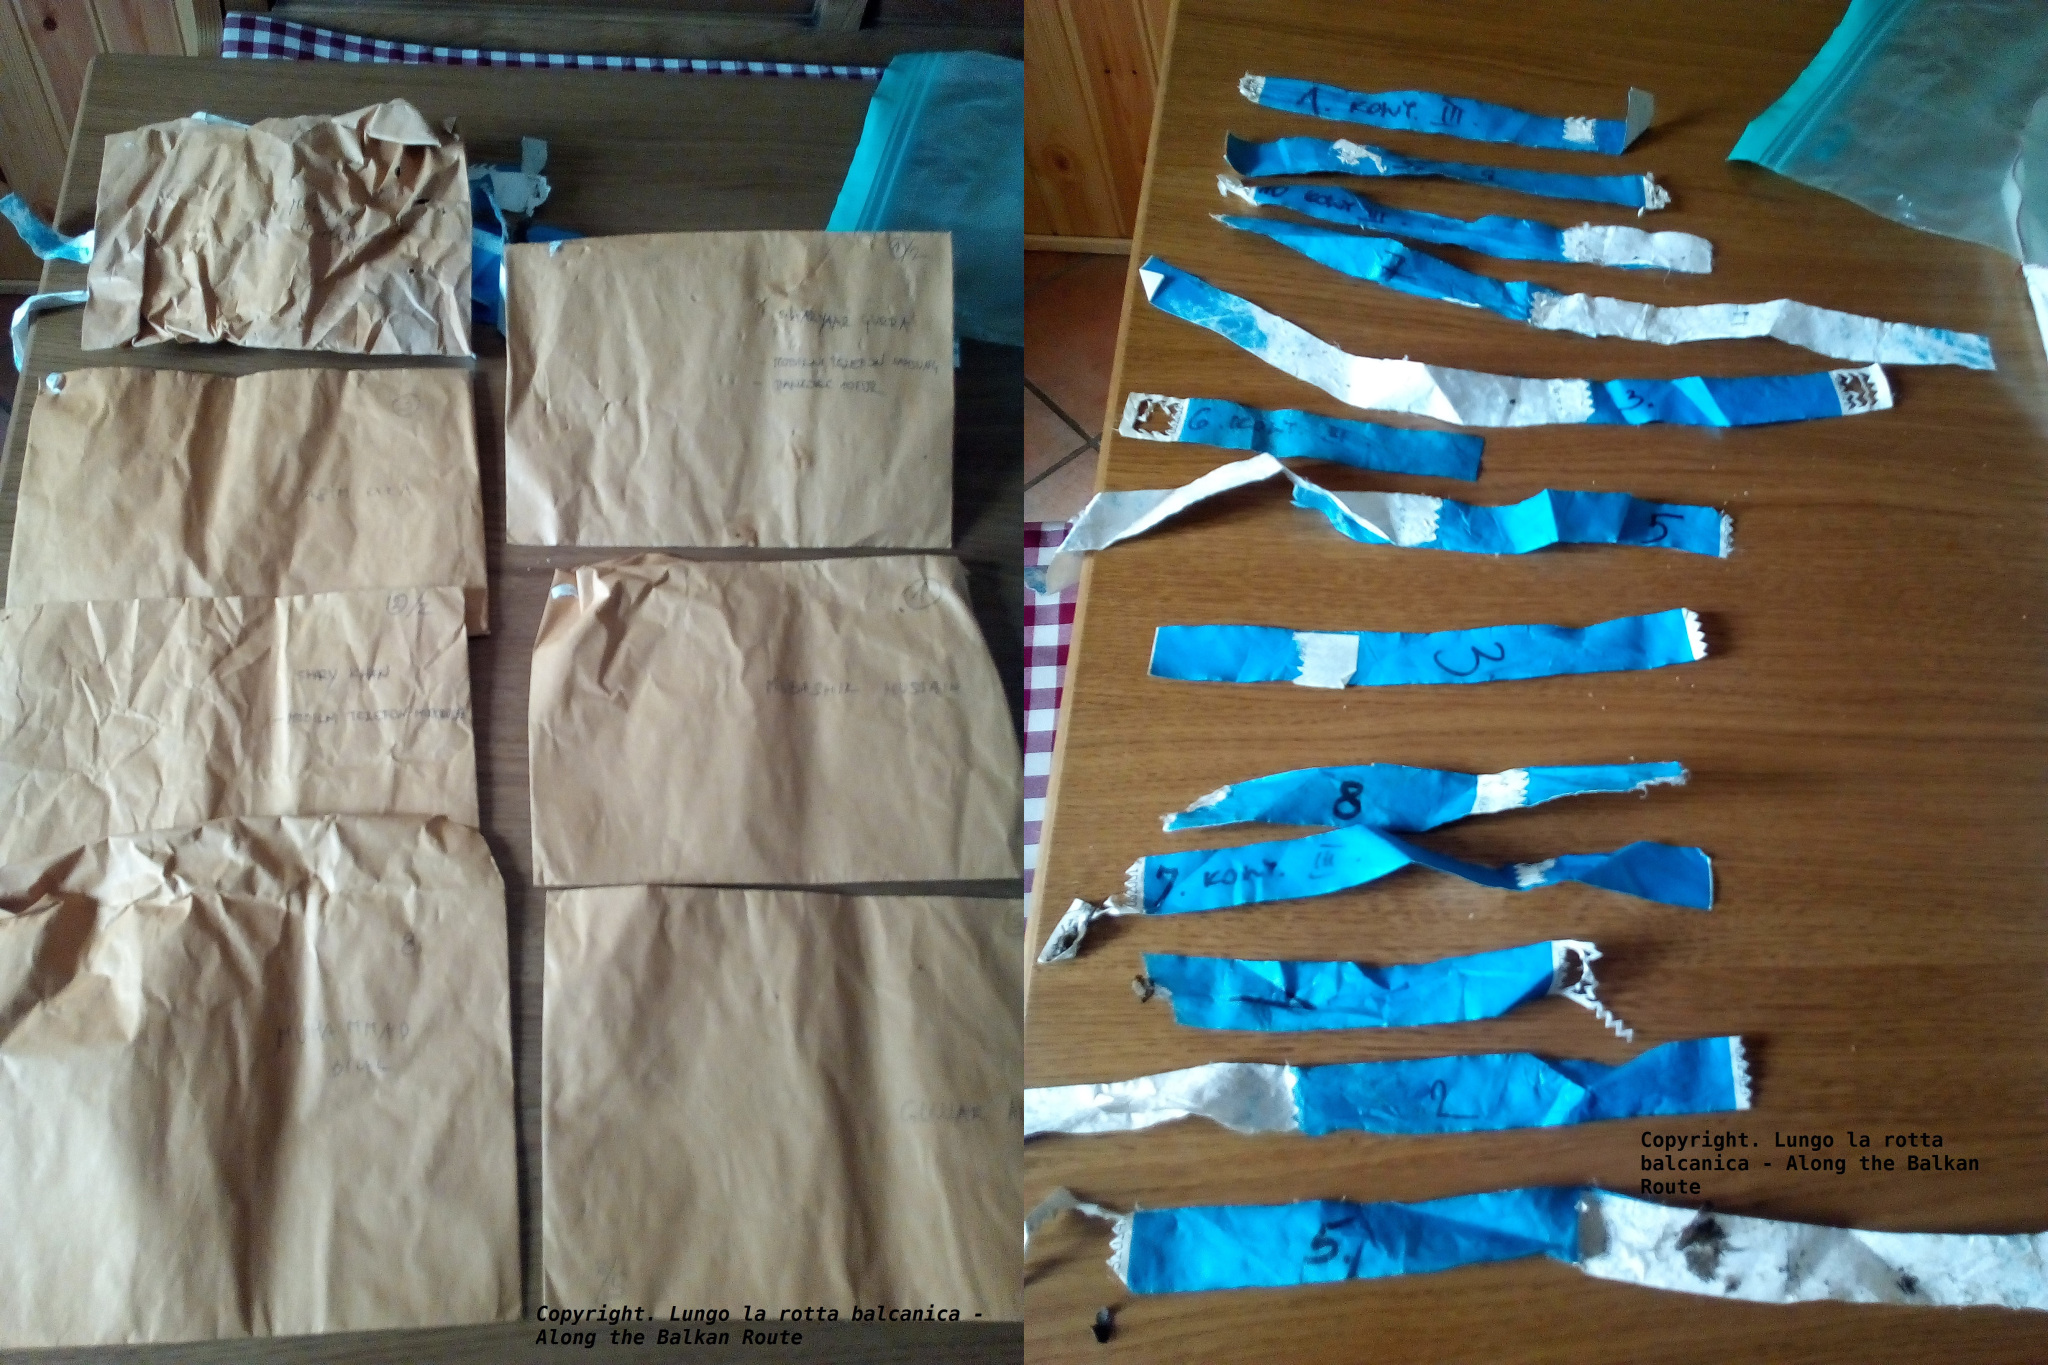 Picture 3 & 4. Envelopes and wristbands used in readmission procedures from Slovenia to Croatia found near Bihać.